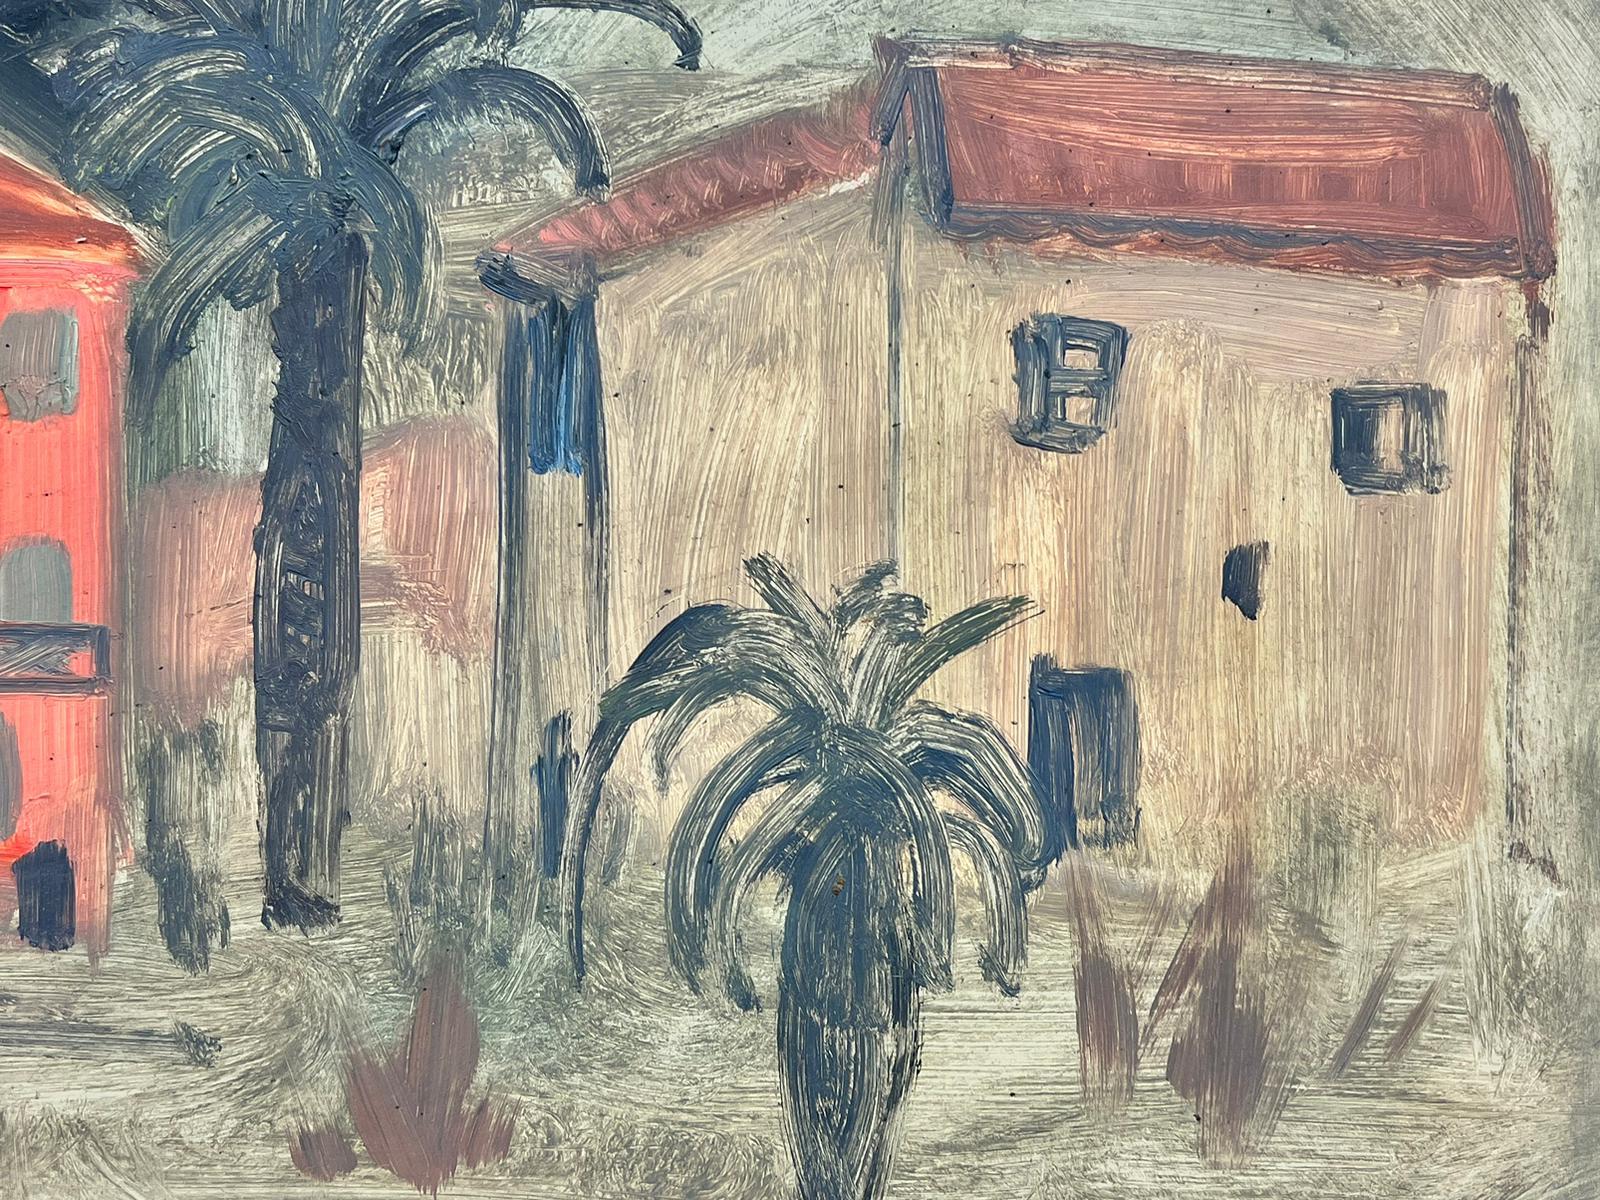 Follower of Matisse, 20th Century French Oil Pink House in South of France - Modern Painting by French School